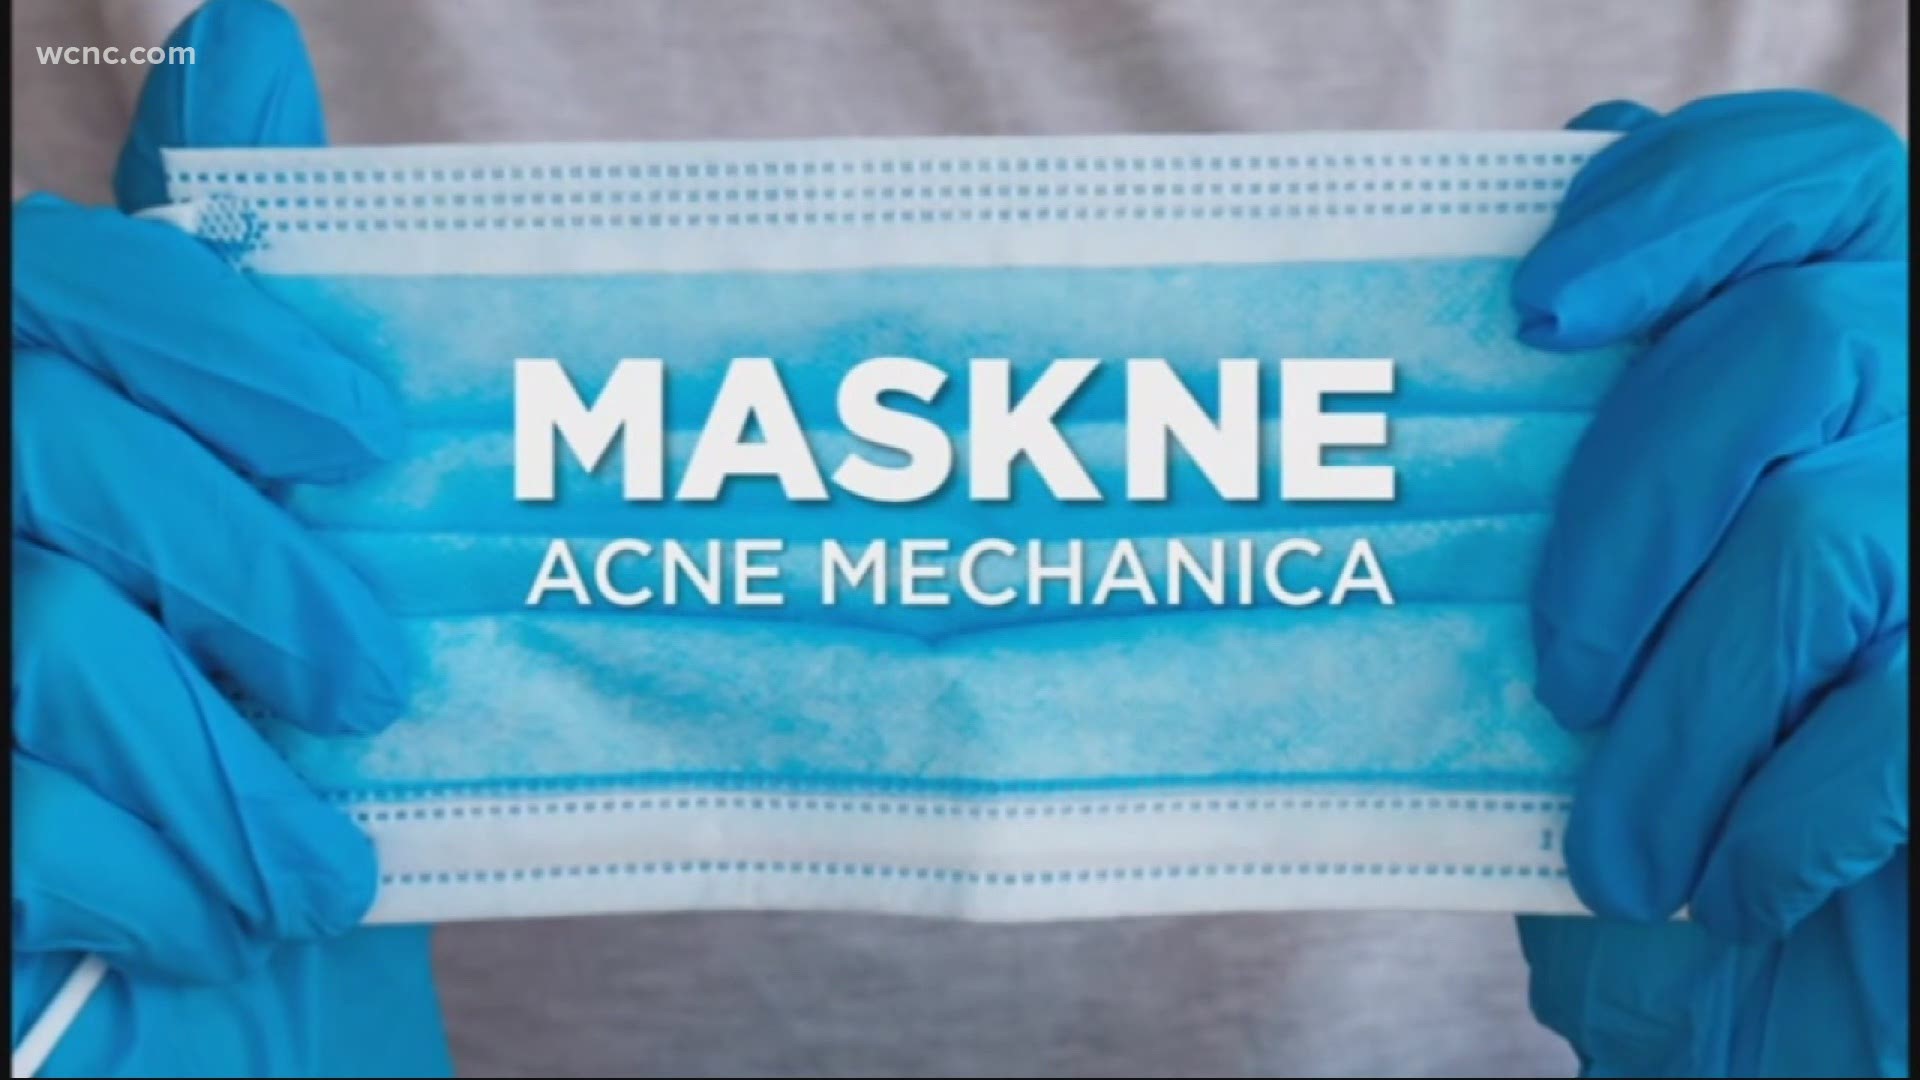 Acne is something many teens and adults have to deal with, and now that they're wearing masks all the time, a new issue is rising up: It's called "maskne."